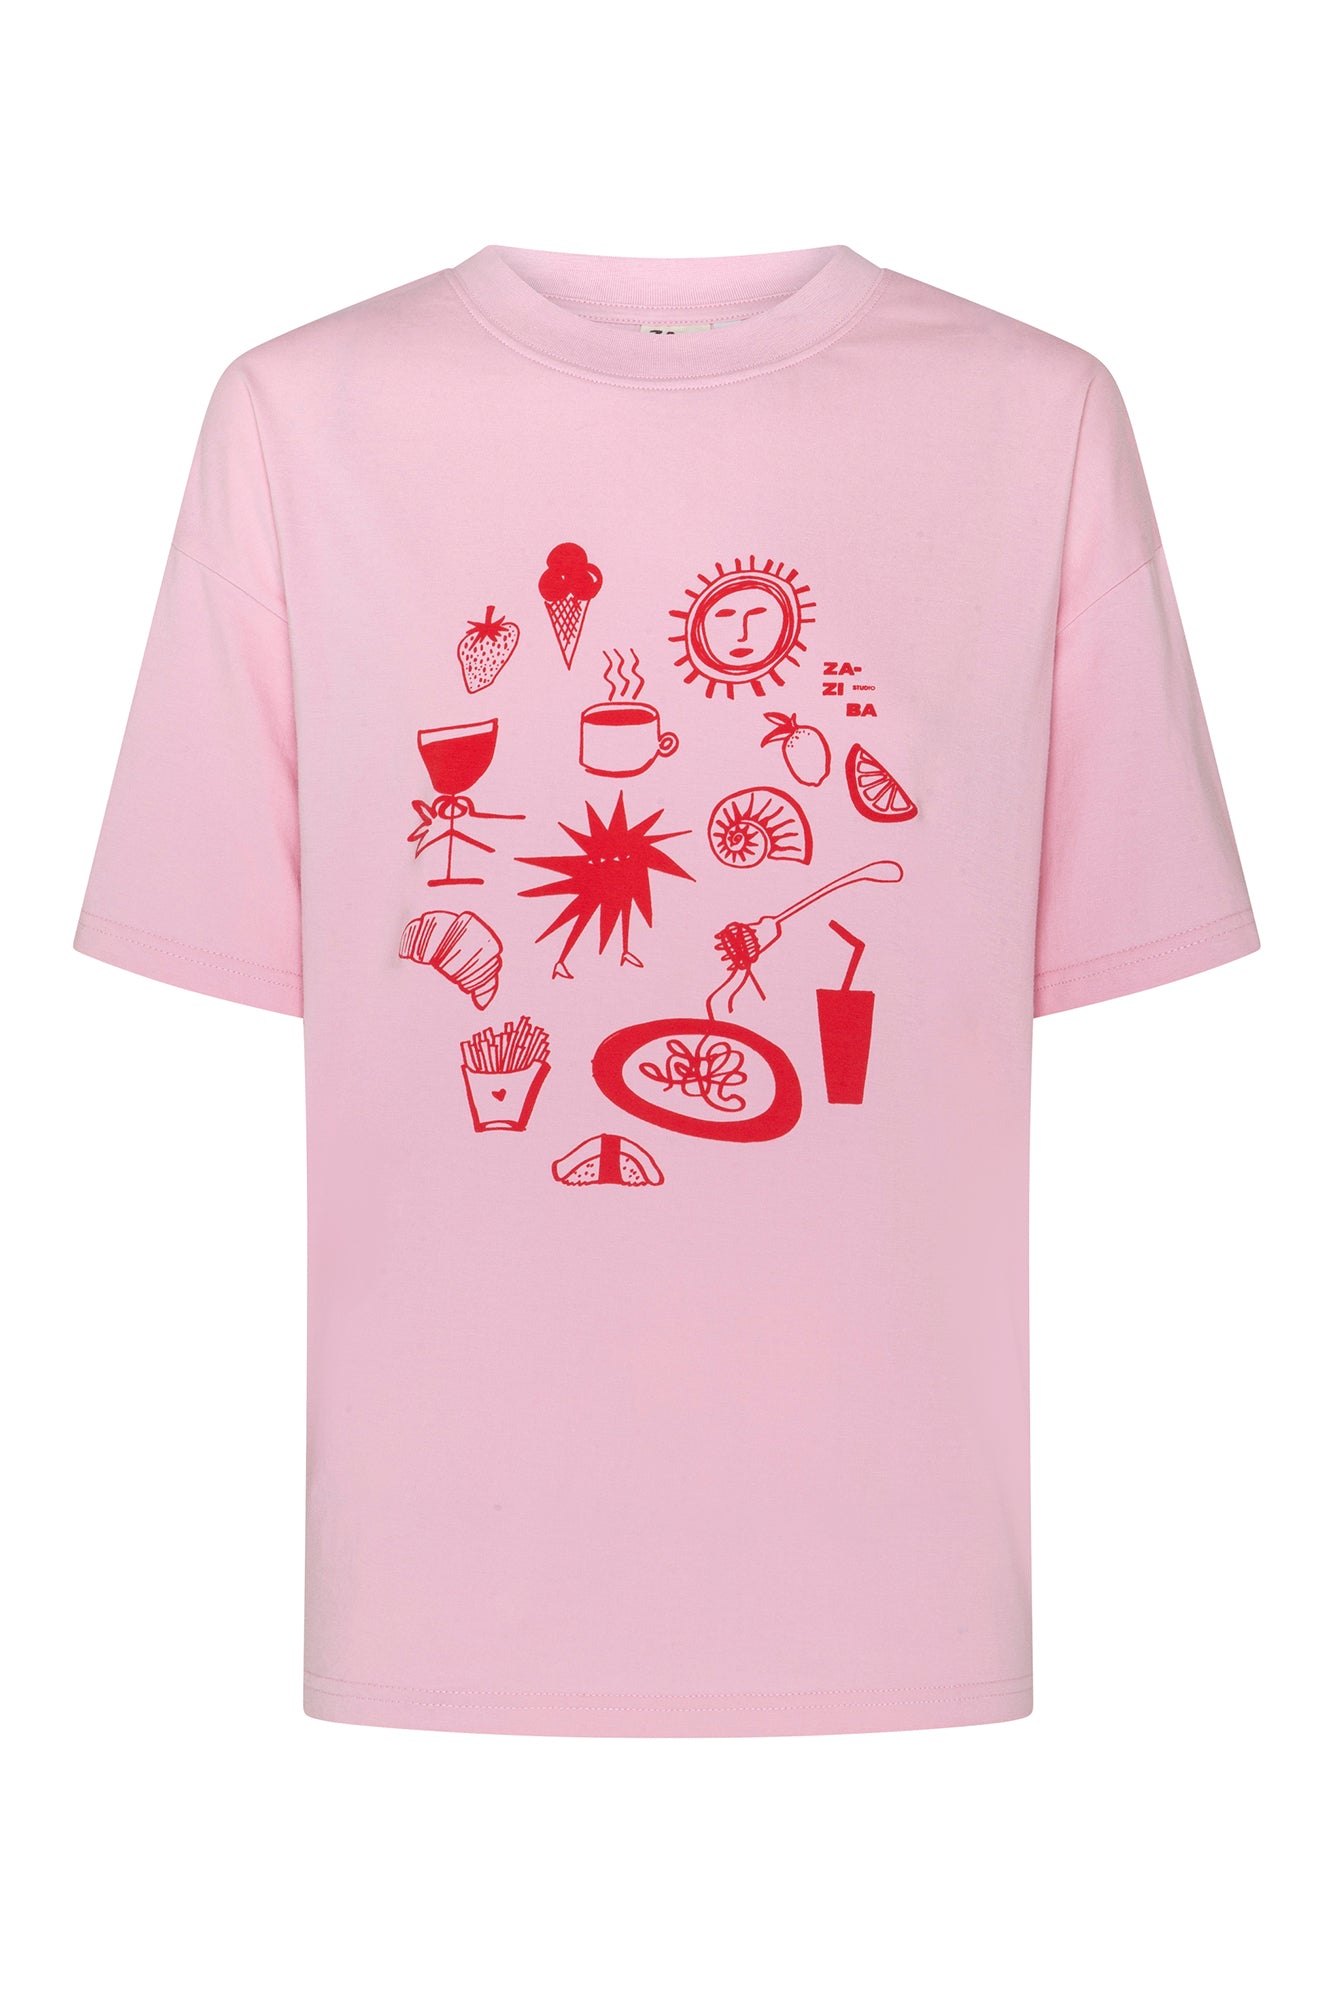 womens tee cotton pink tshirt with red print